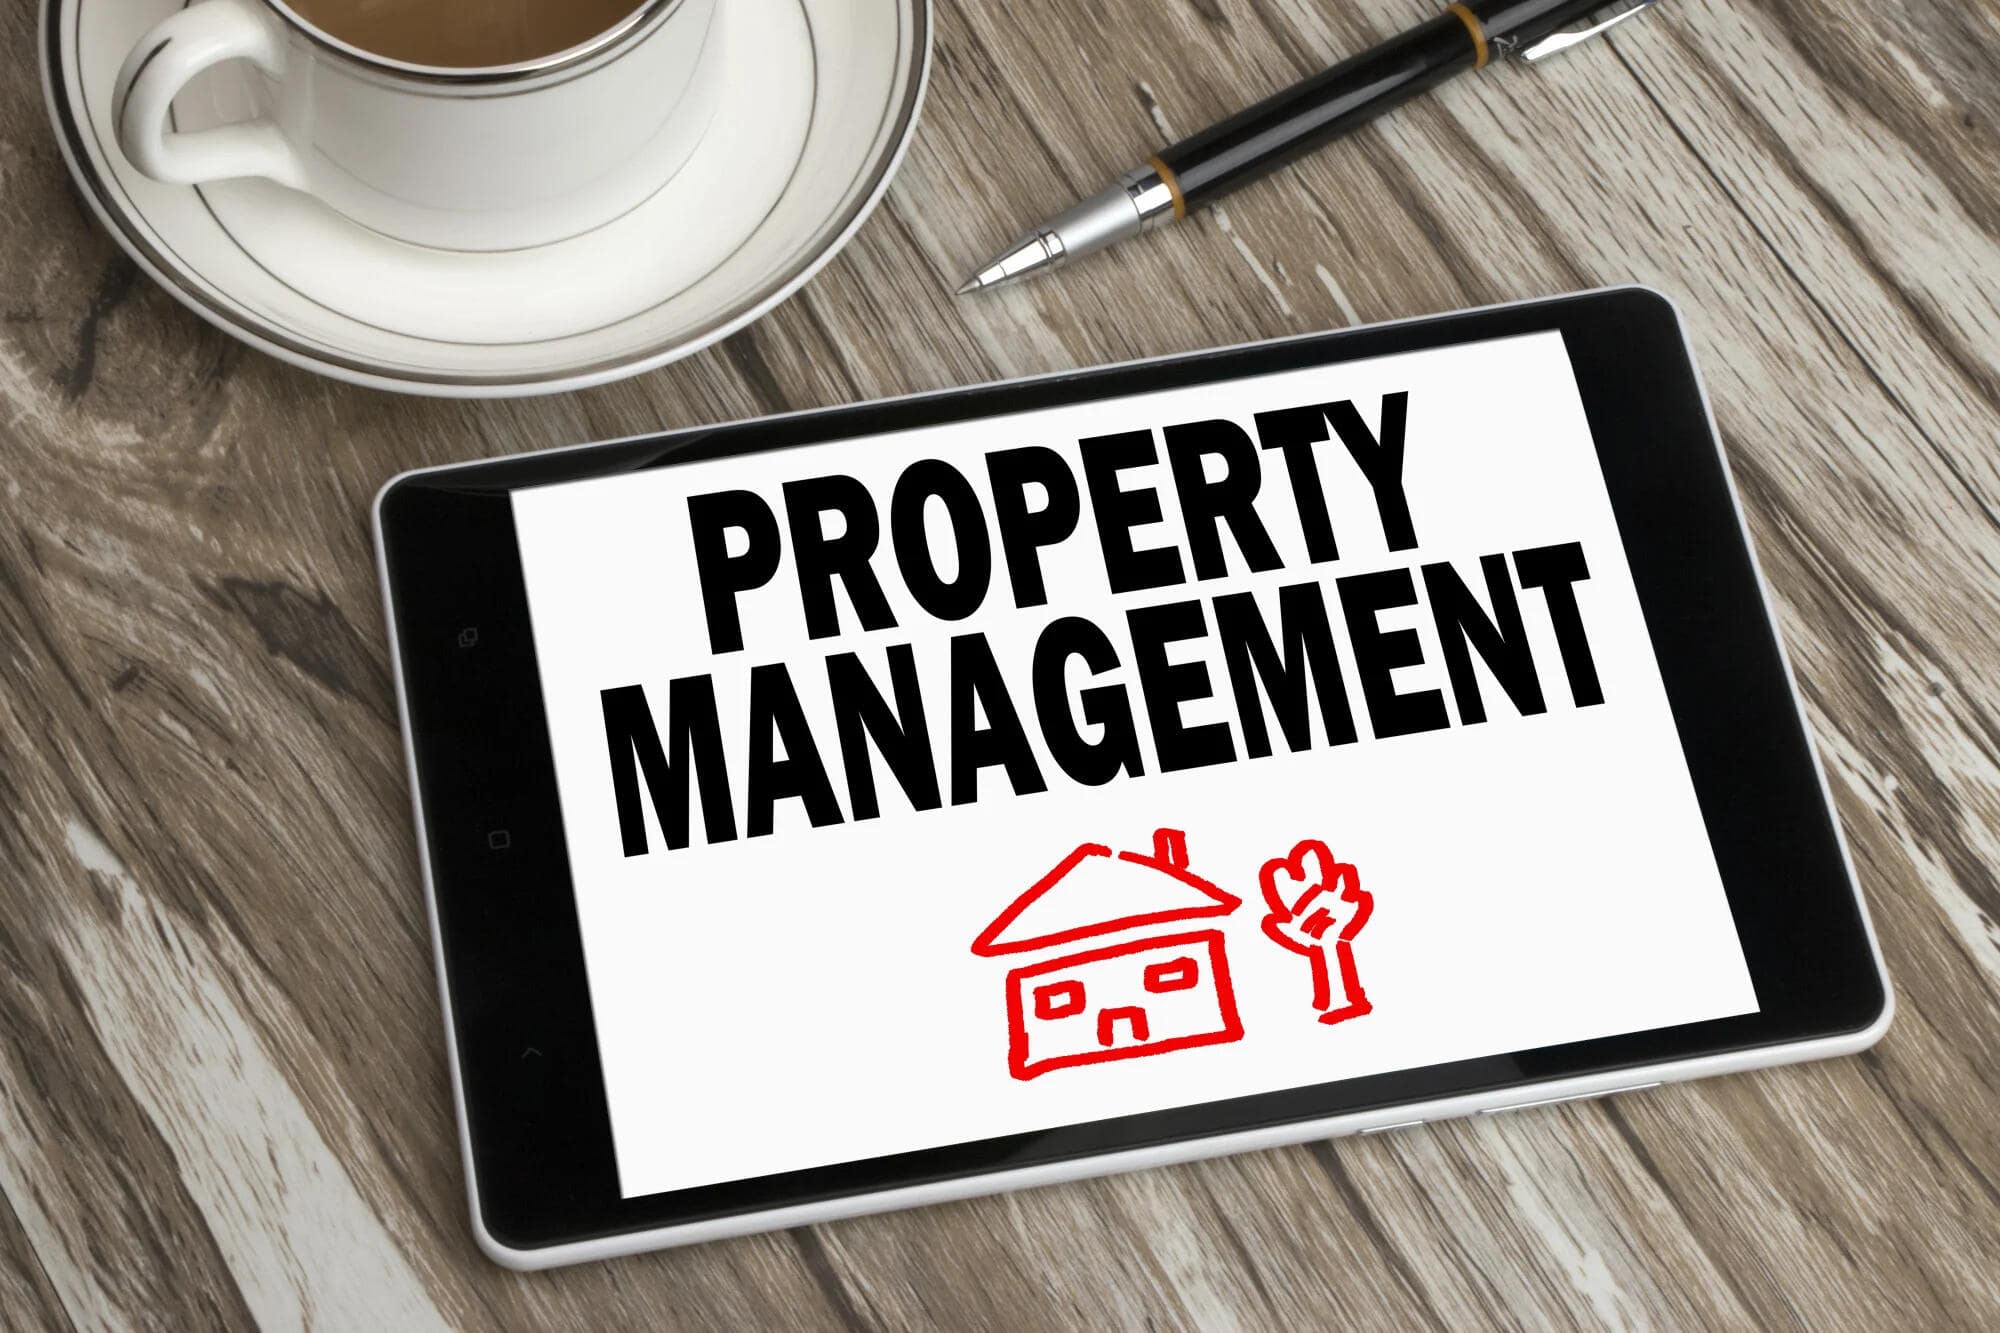 Why Should I Look Into Hiring a Property Manager in Daytona Beach, FL